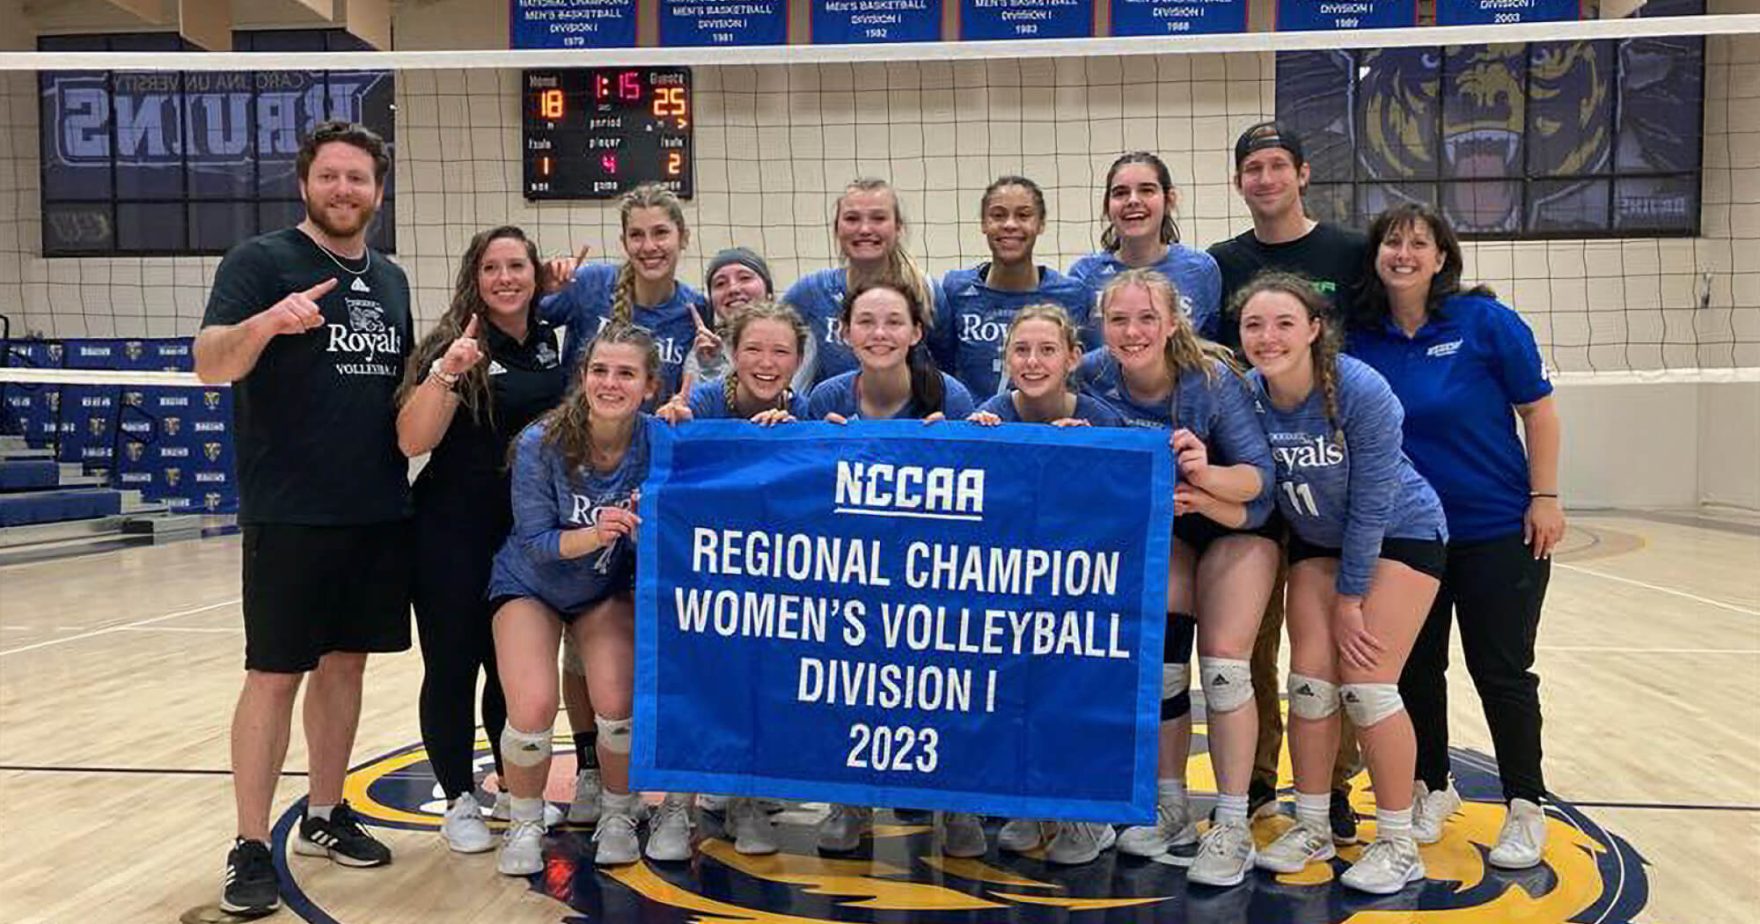 Regent University Women’s Volleyball Team Makes History as 2023 NCCAA South Regional Champions